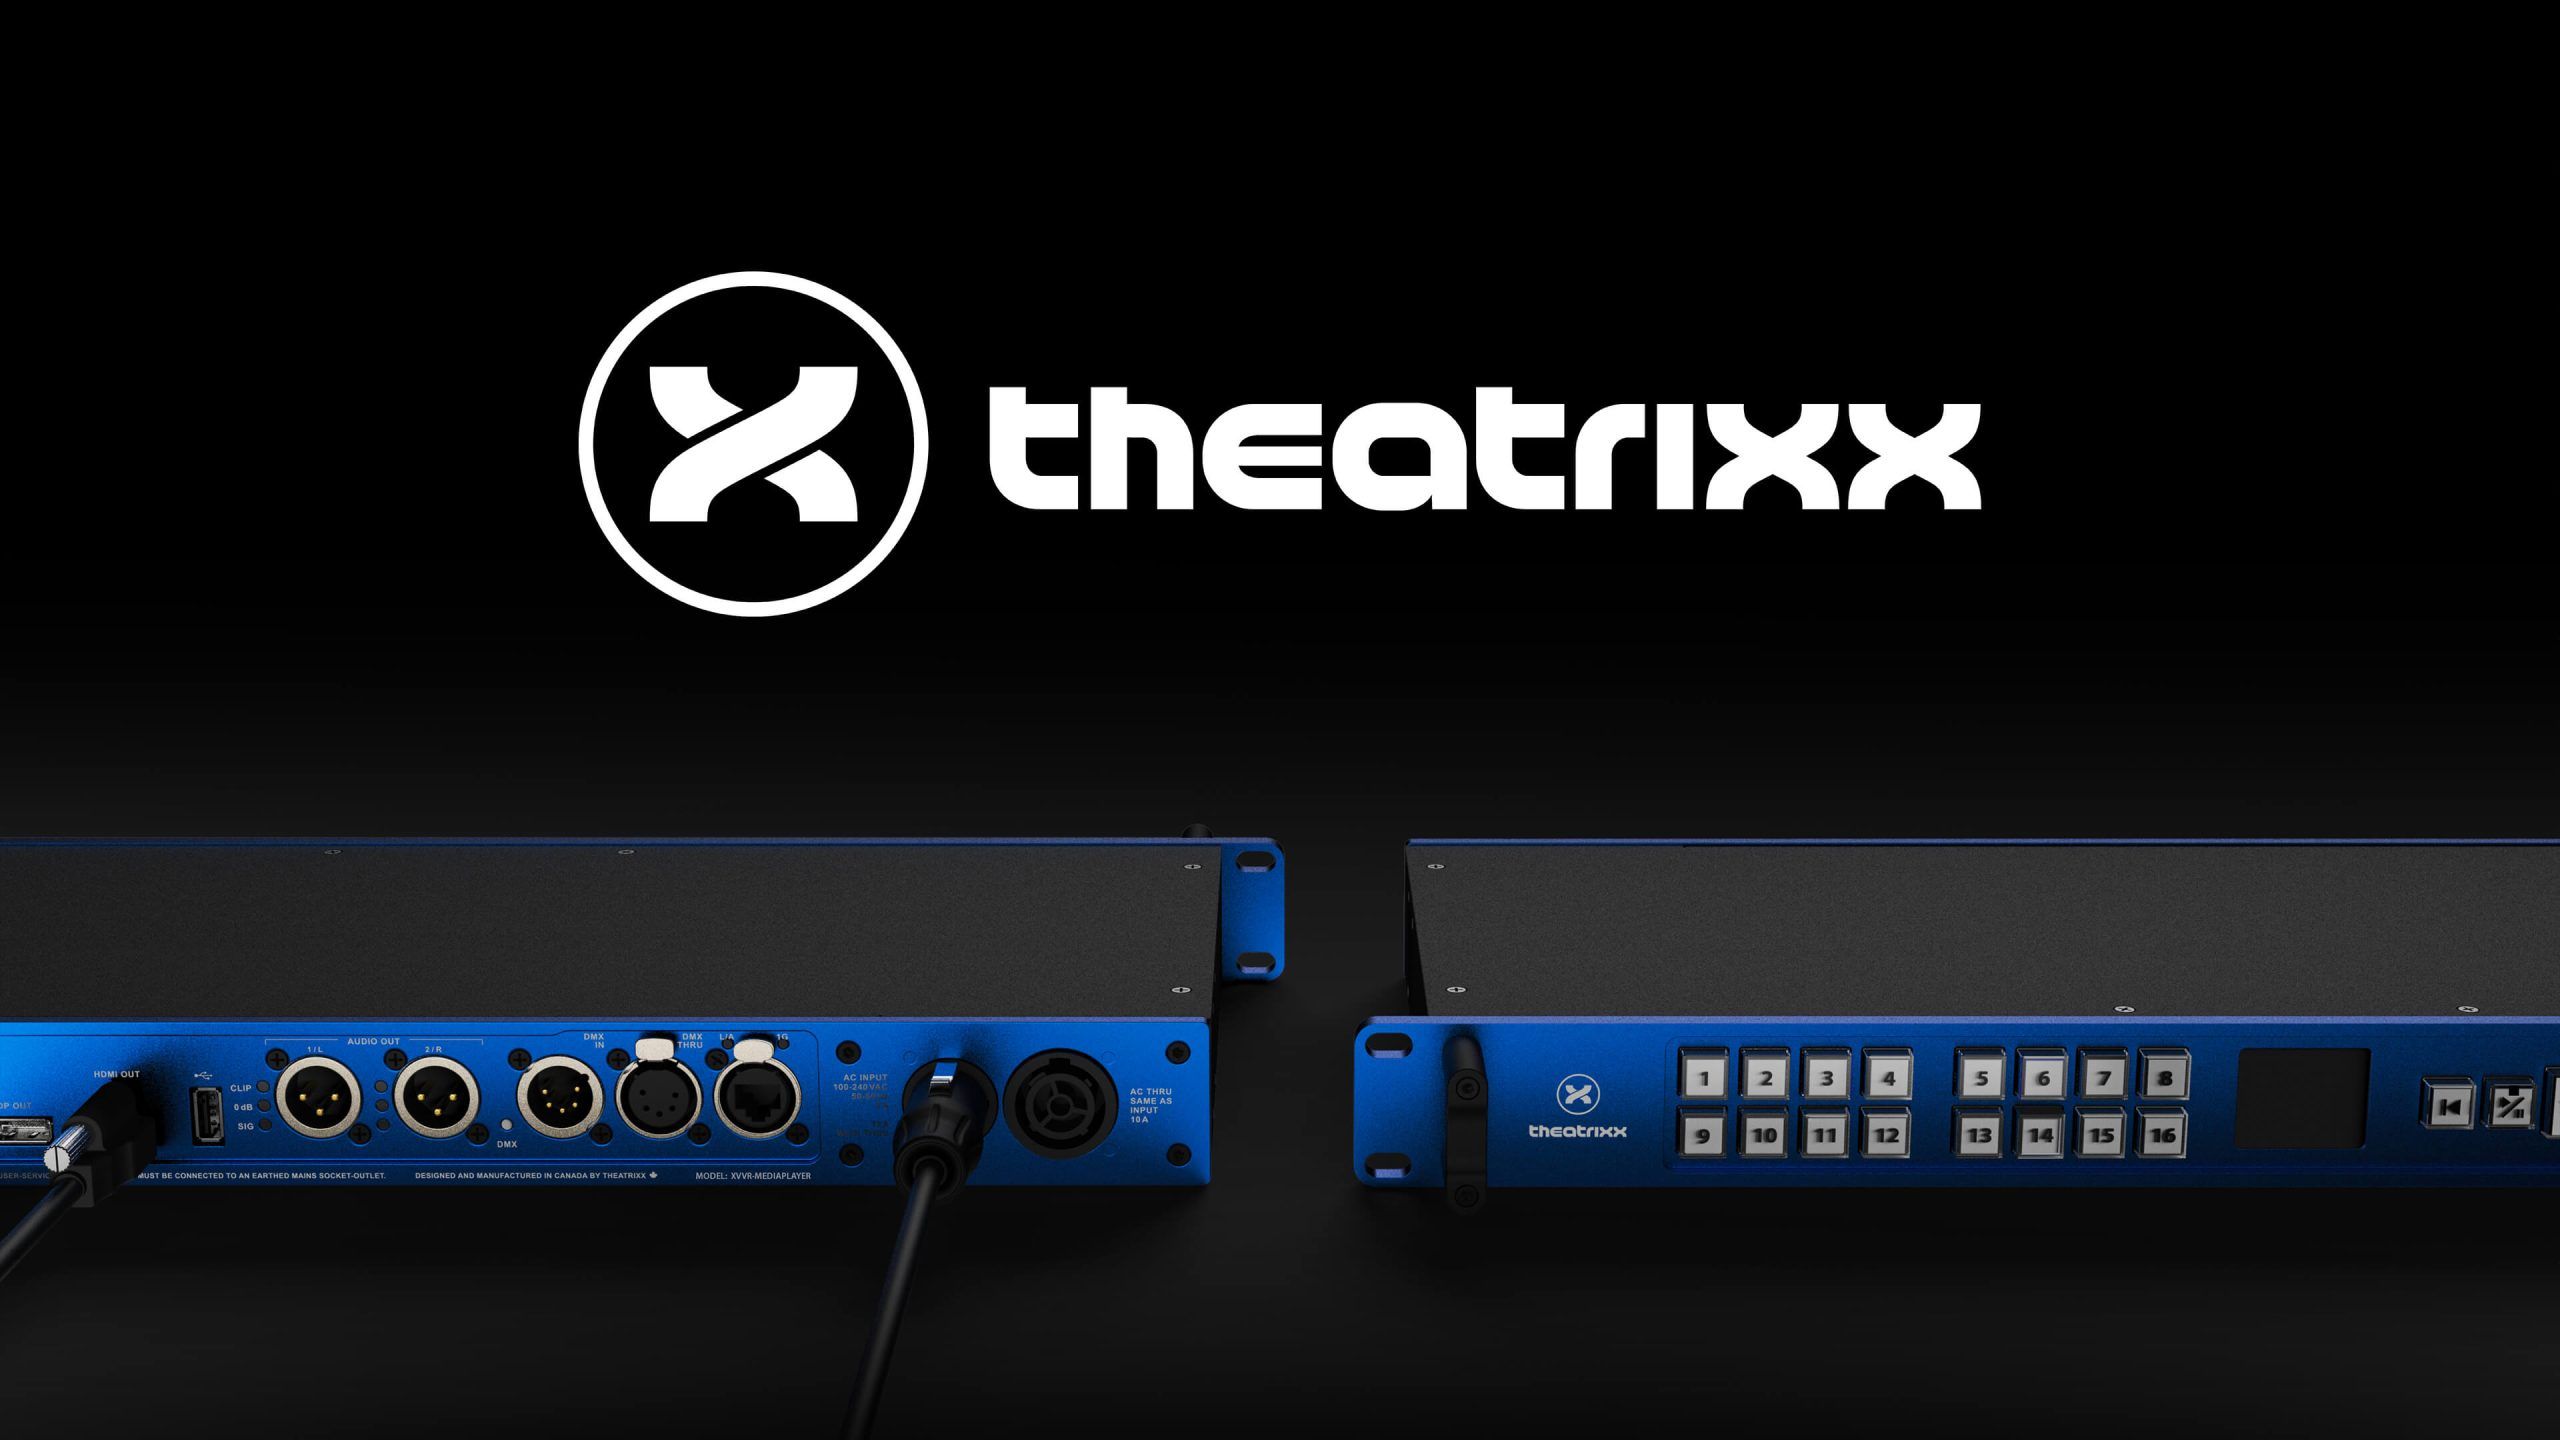 A pair of blue audio mixers with the word theatrix on them can be used for projection in a theater setting with Barco or Panasonic equipment.